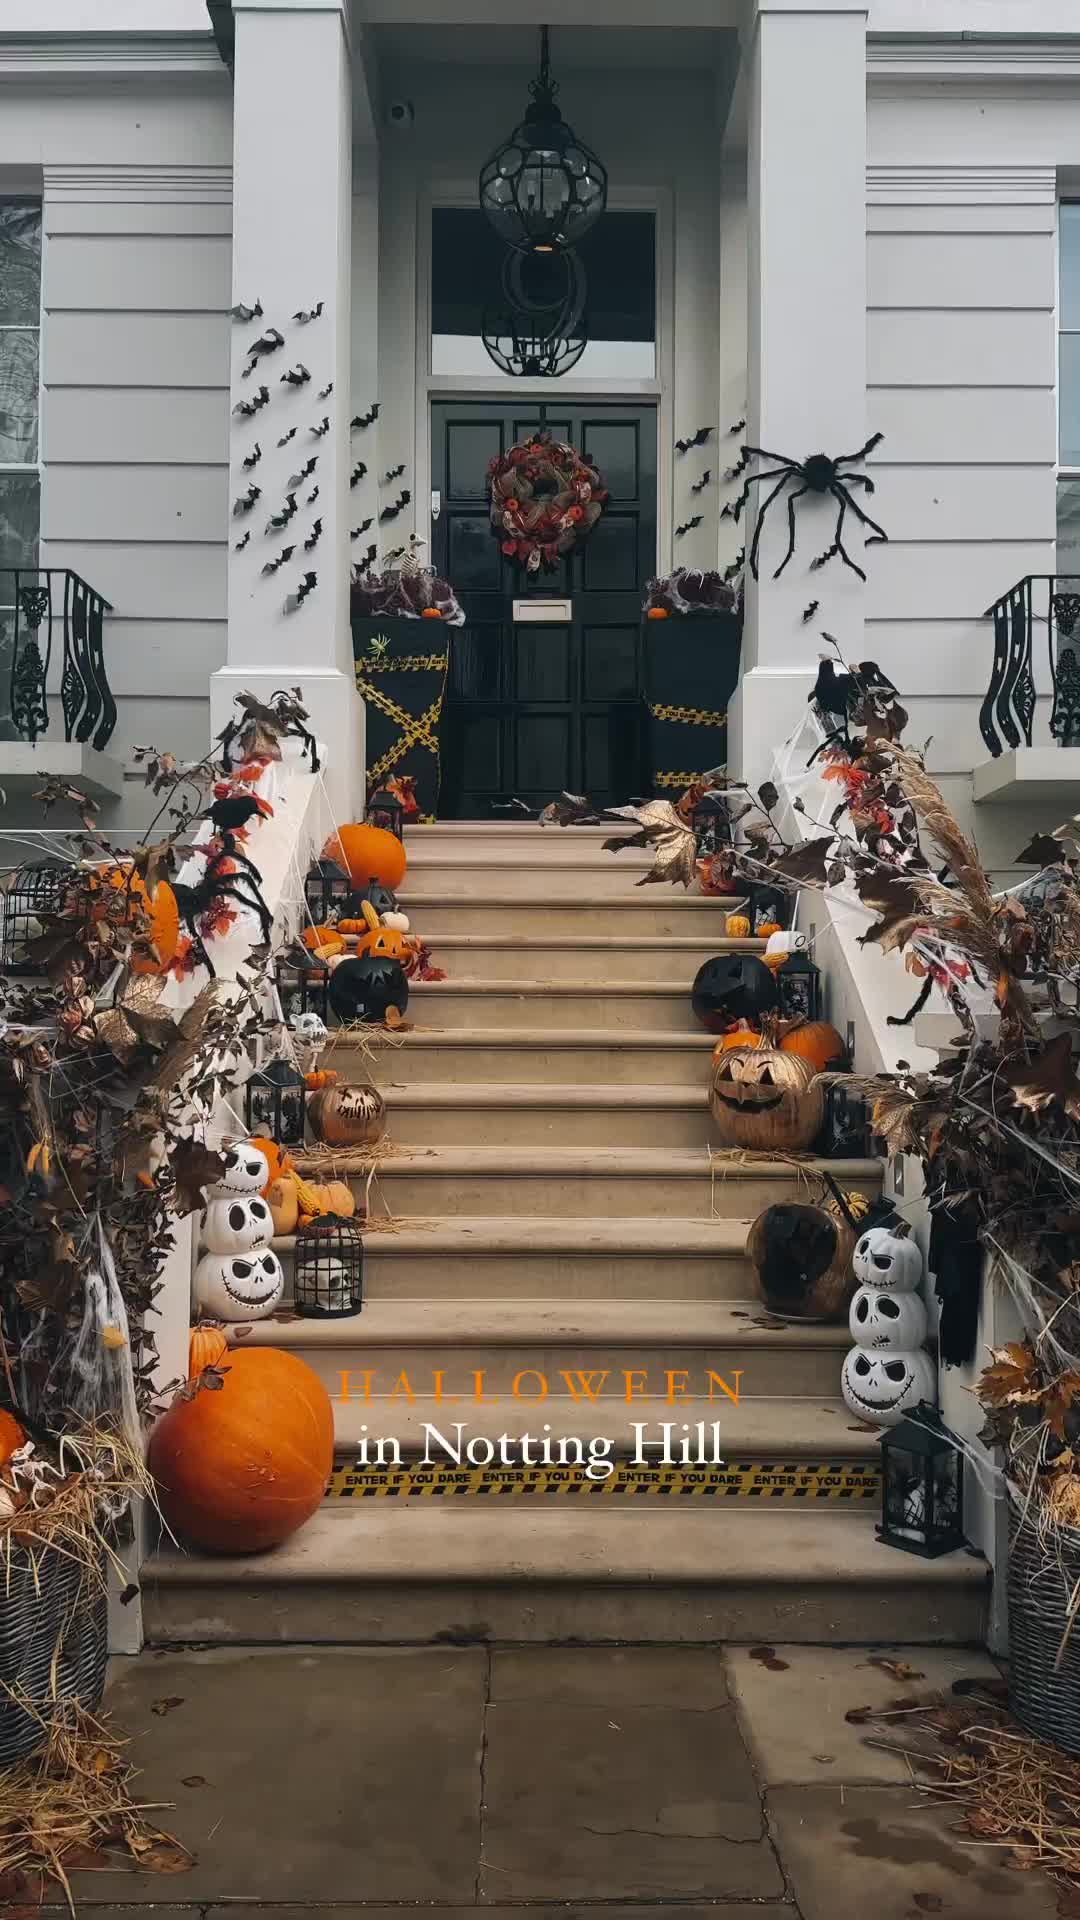 Halloween Displays in Notting Hill, London